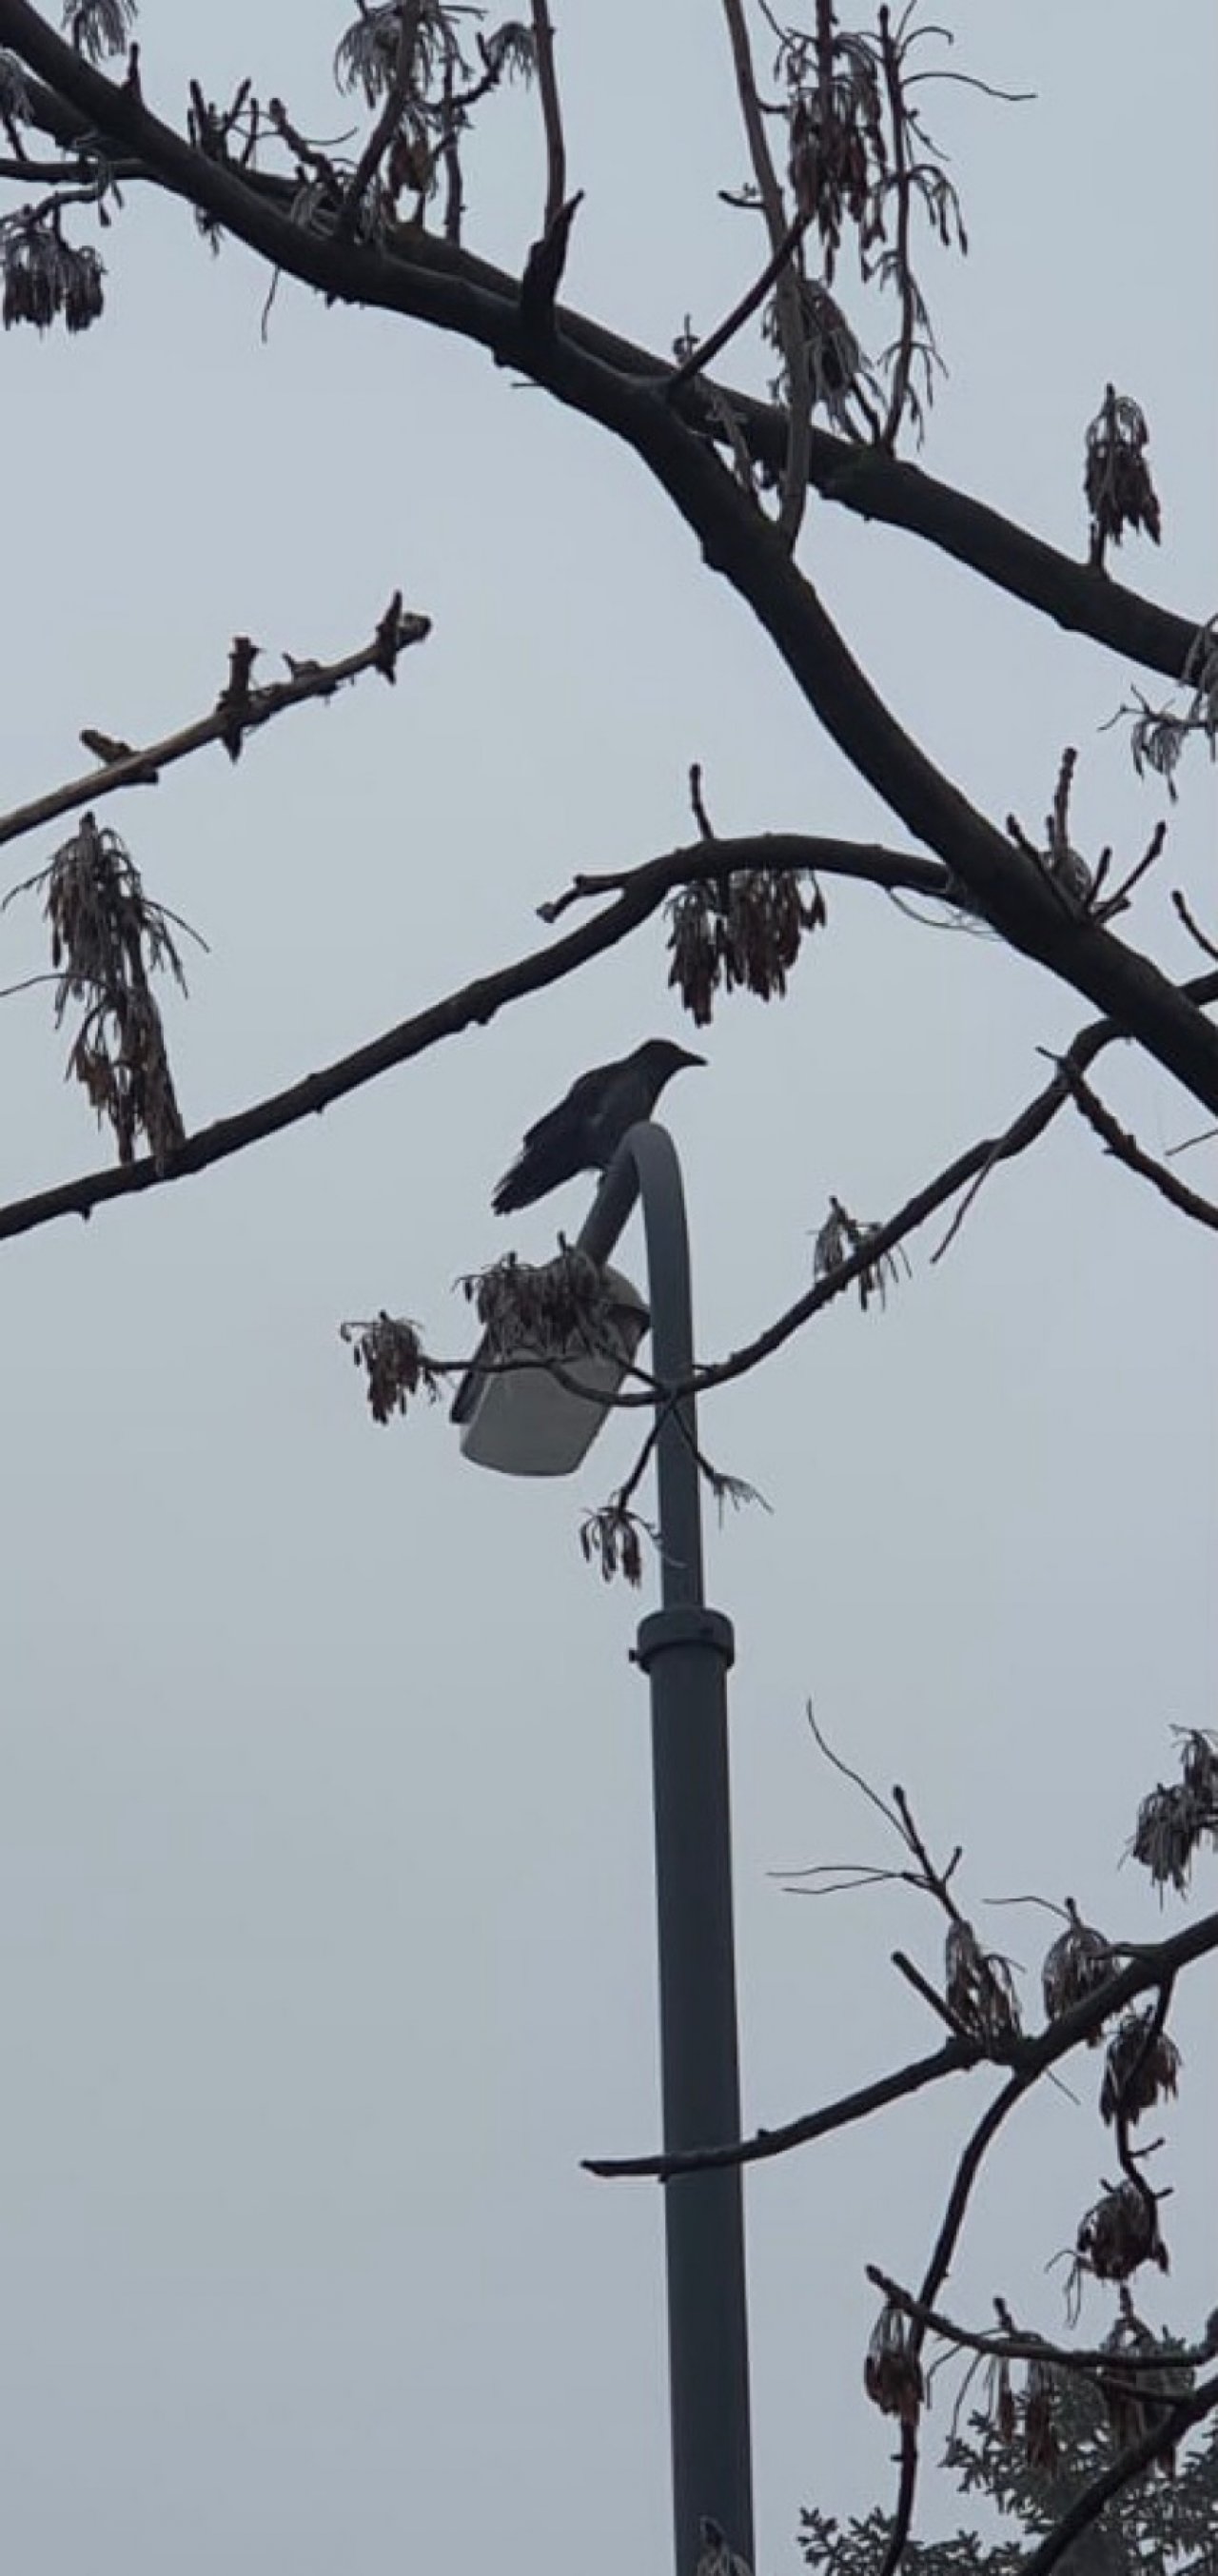 Hooded Crow in KraMobil App spotted by Krarin on 05.01.2021